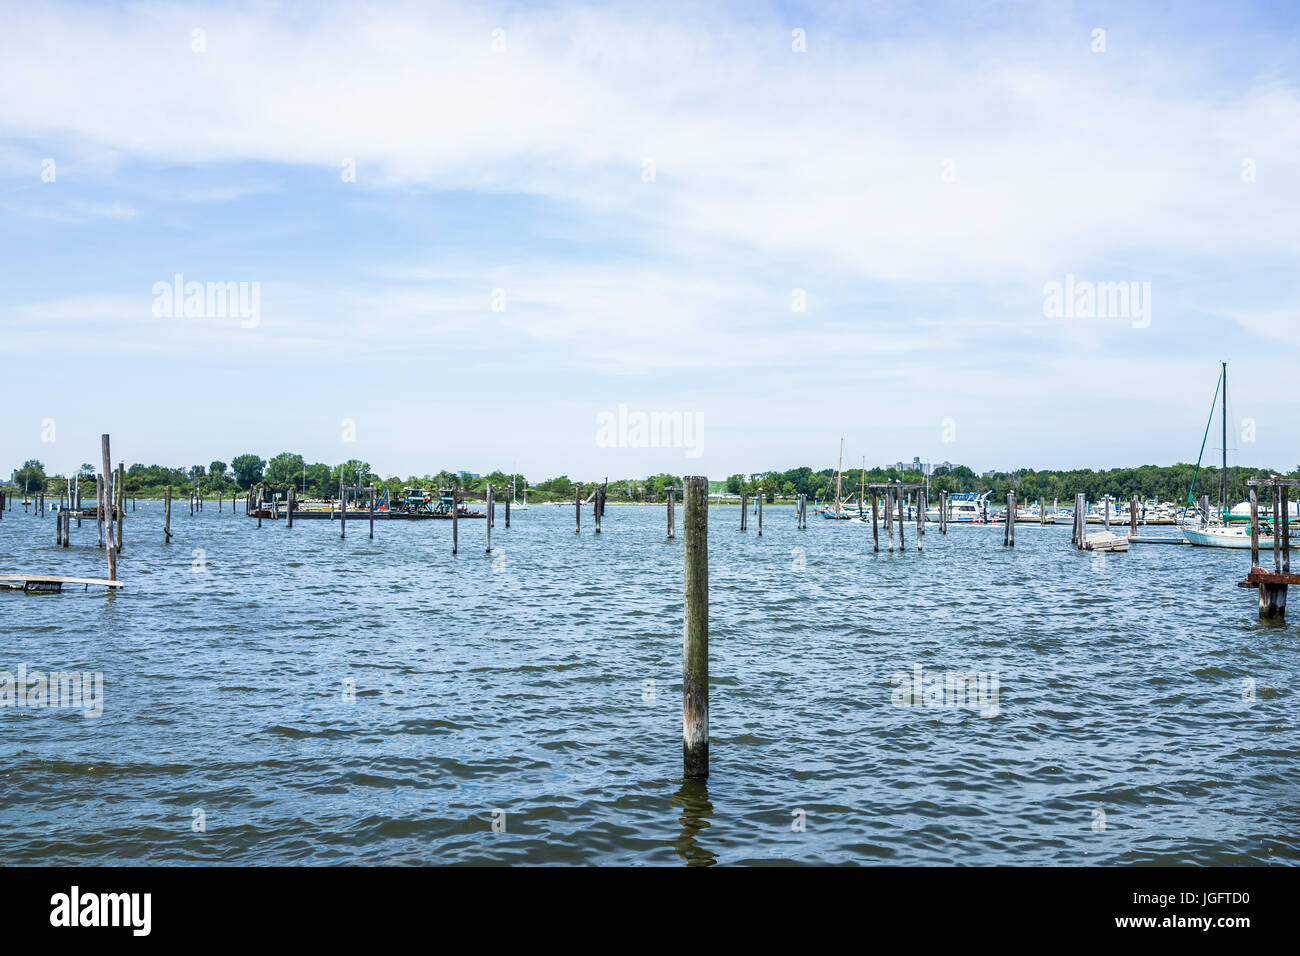 Bronx, USA - June 11, 2017: City Island harbor with boats and old, decaying pier Stock Photo